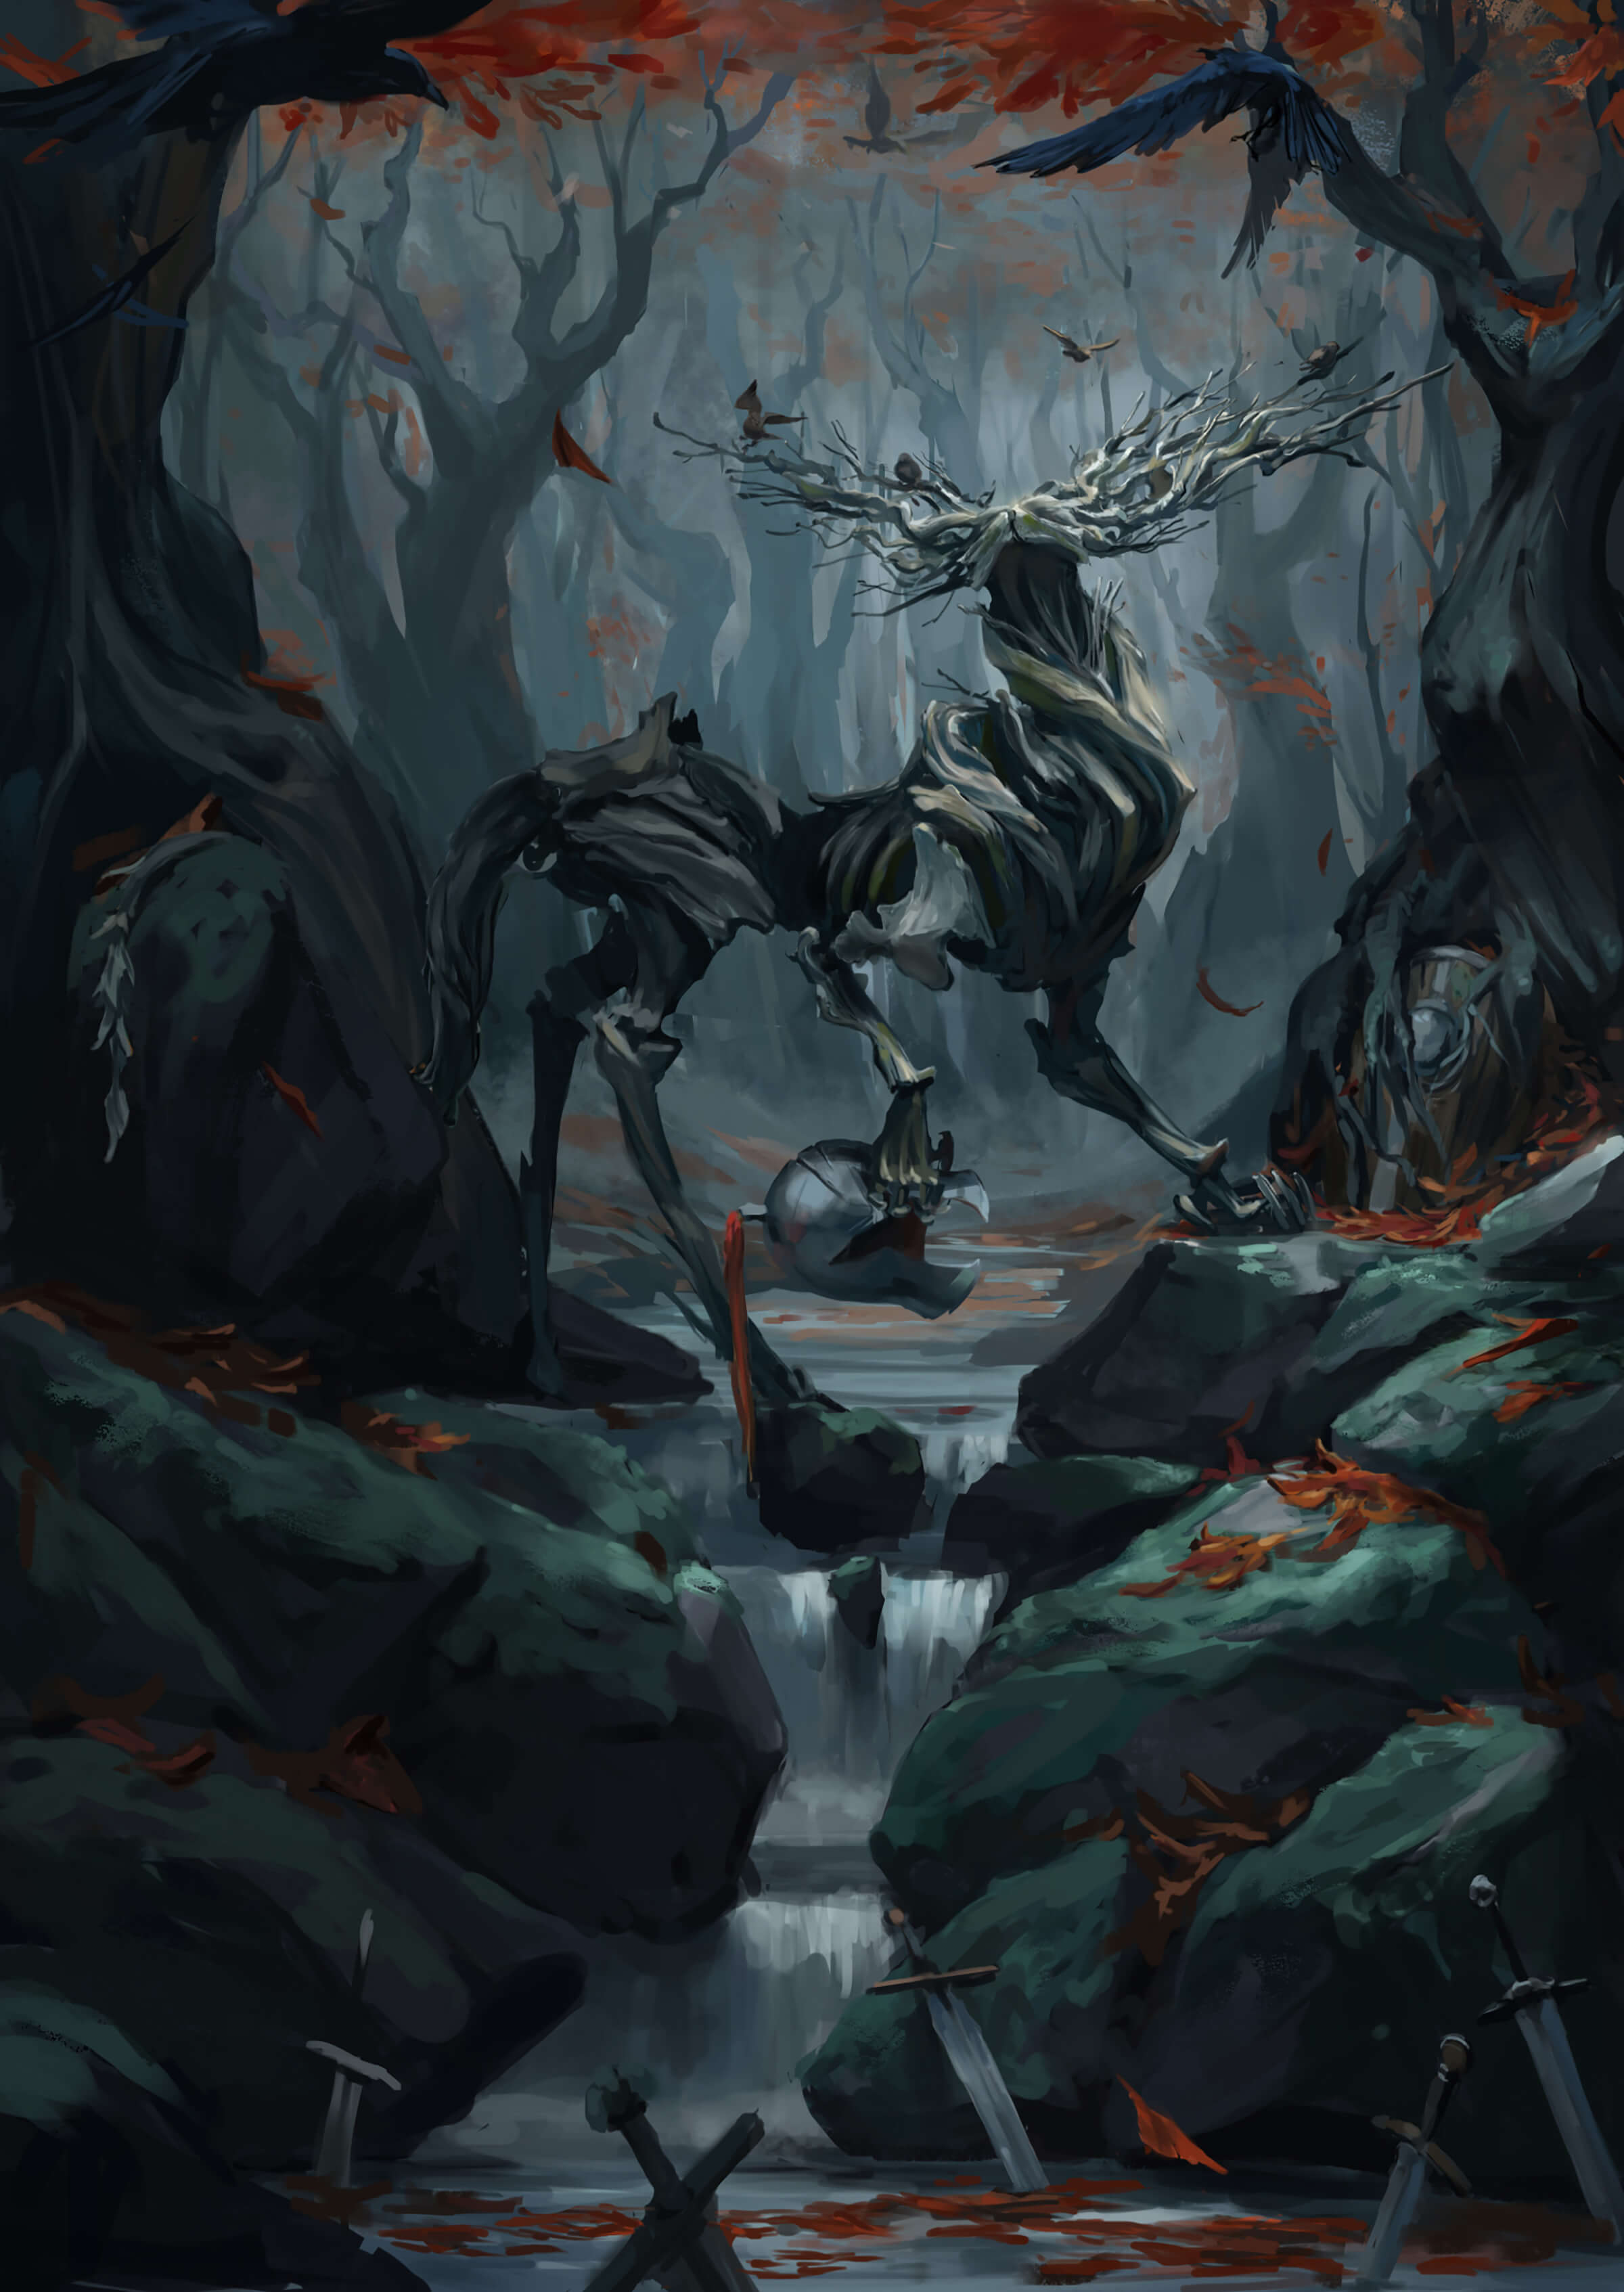 A wooden creature stands in a dark forest